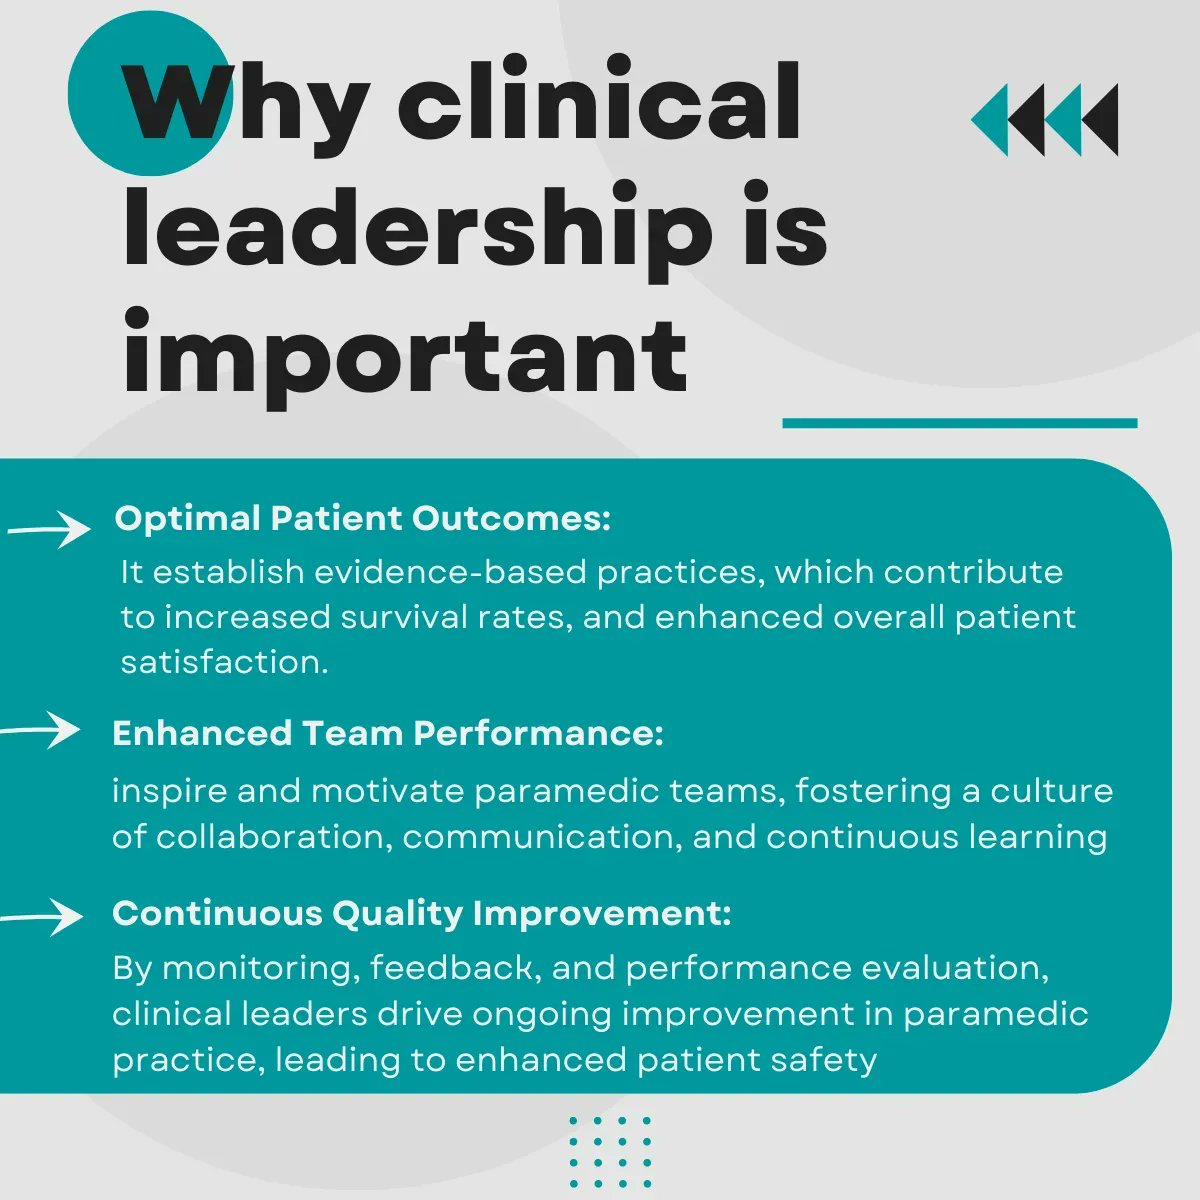 Clinical leadership is essential in paramedicine!

What models of clinical leadership & supervision do you have in your organizations? How is this achieved?

#ParamedicStudents